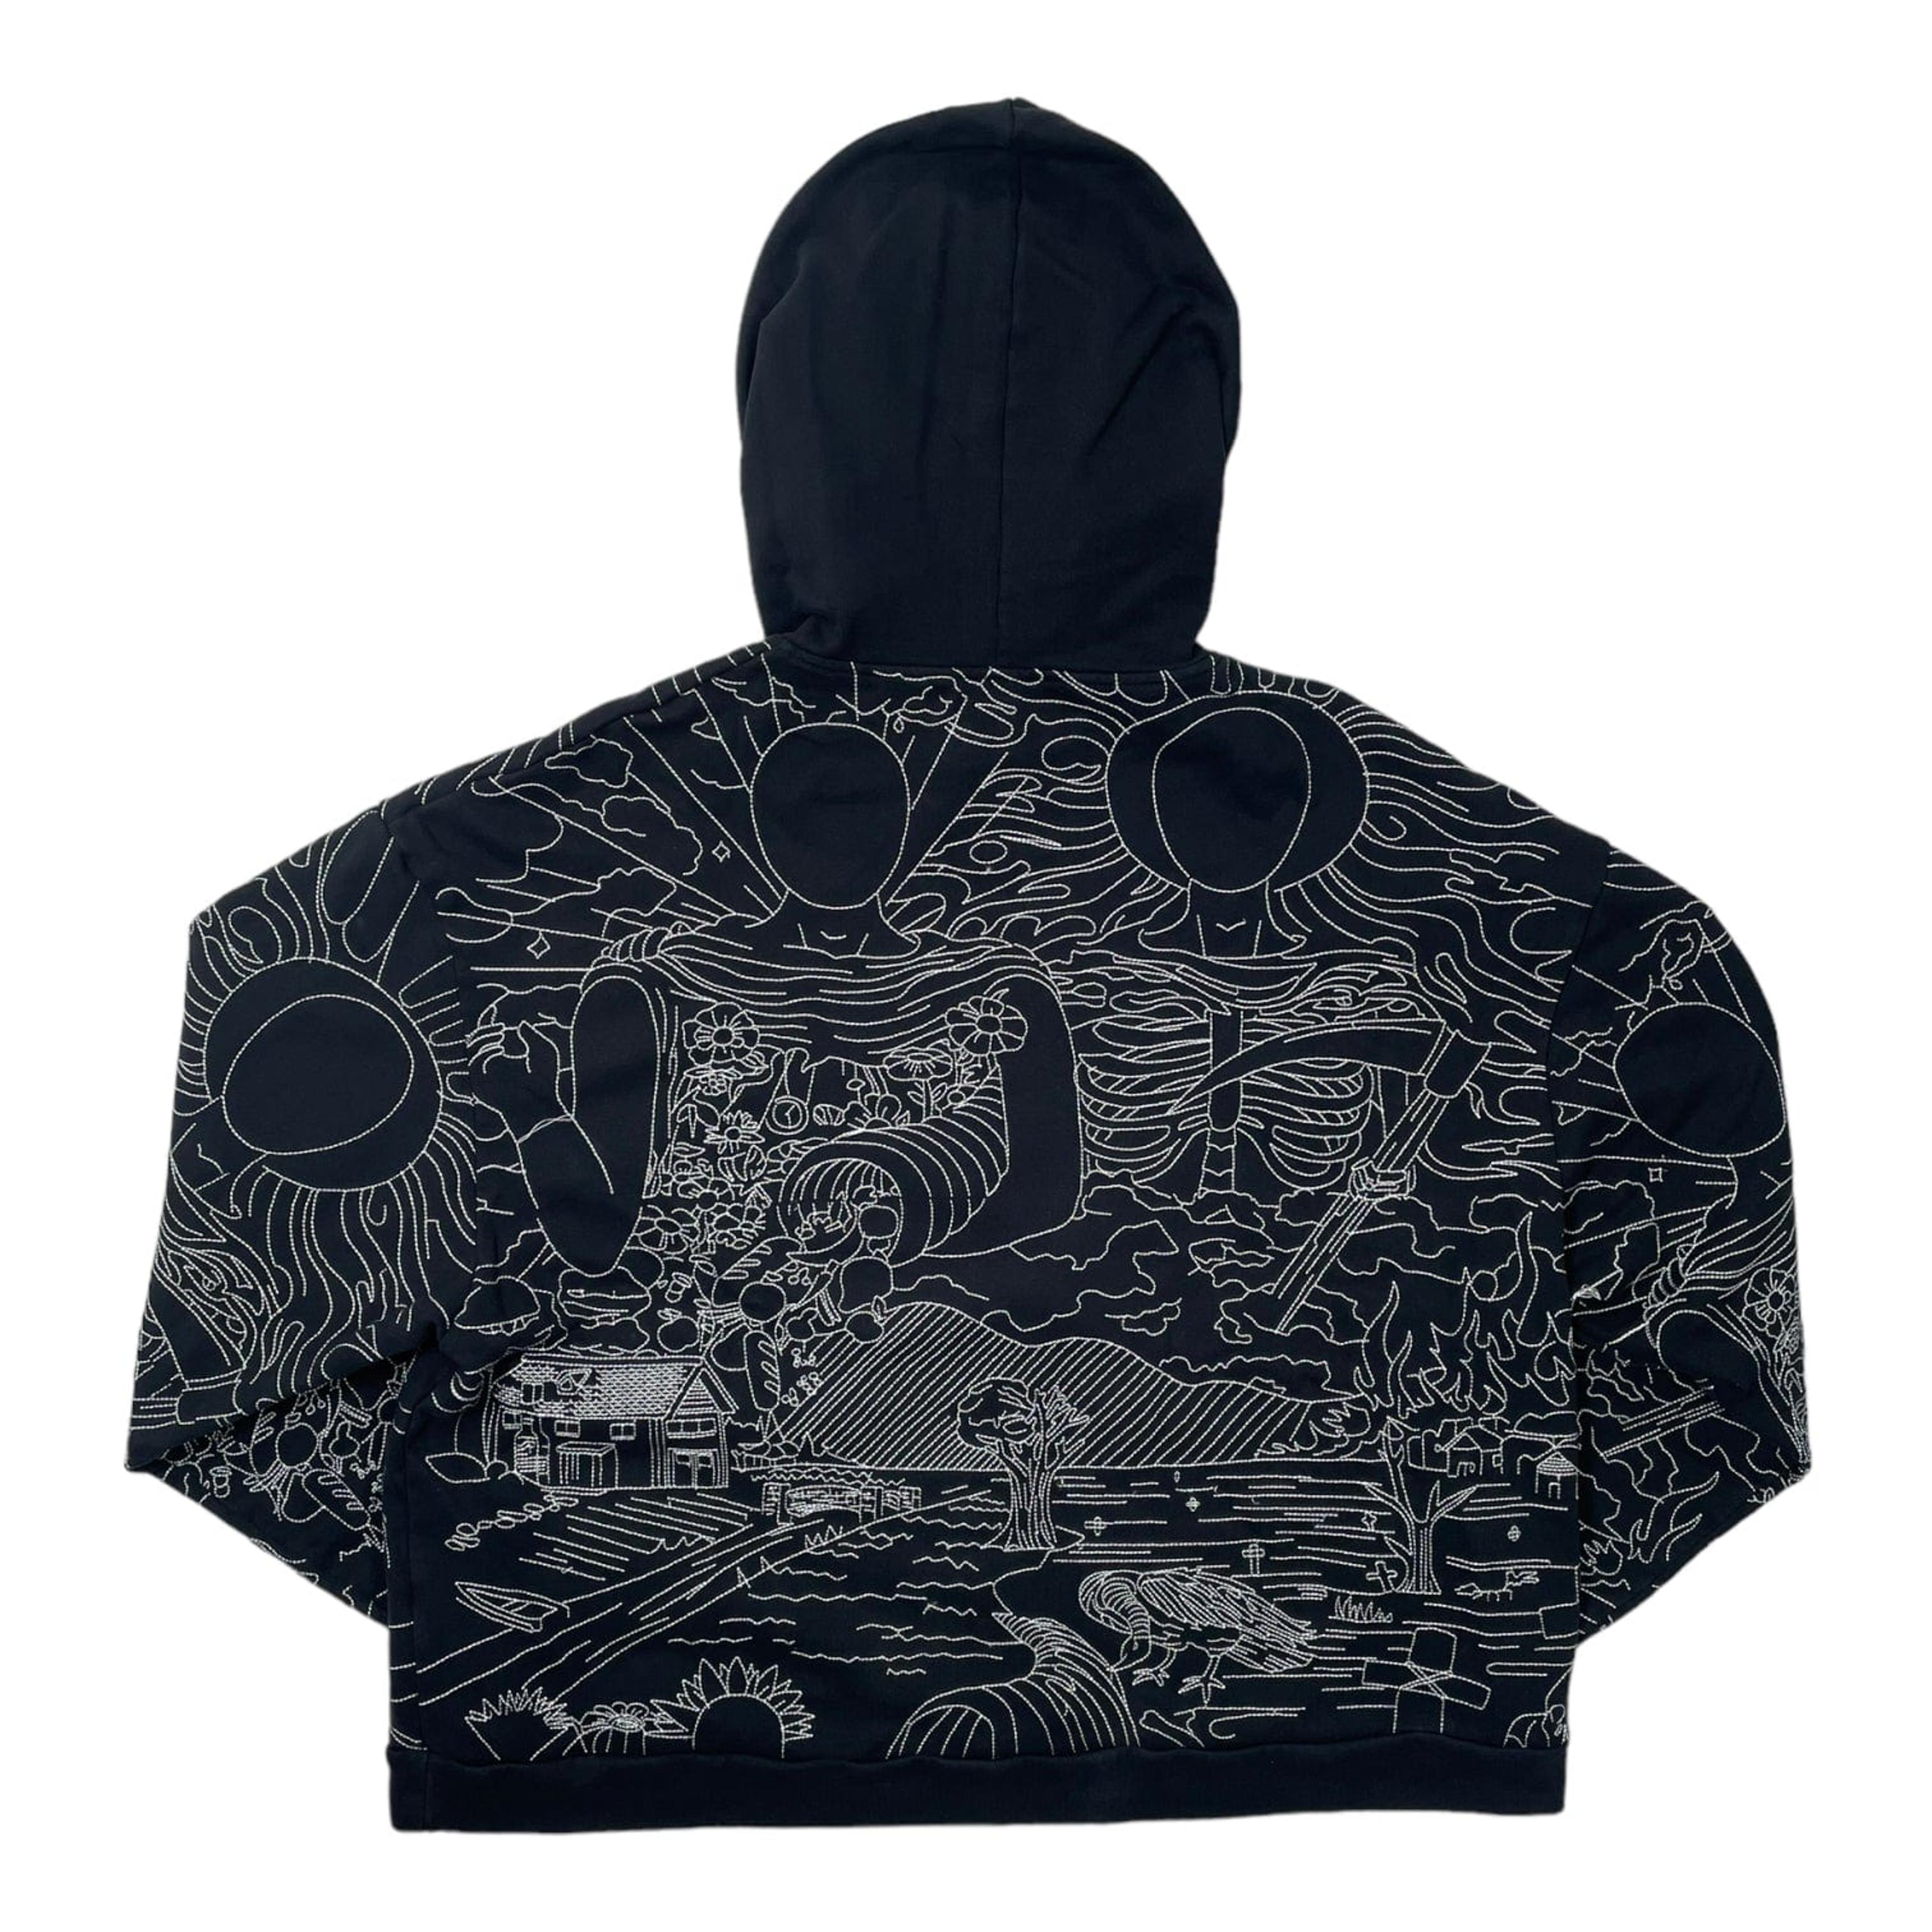 Alternate View 1 of Who Decides War by MRDR BRVDO Horseman Embroidery Hooded Sweatsh